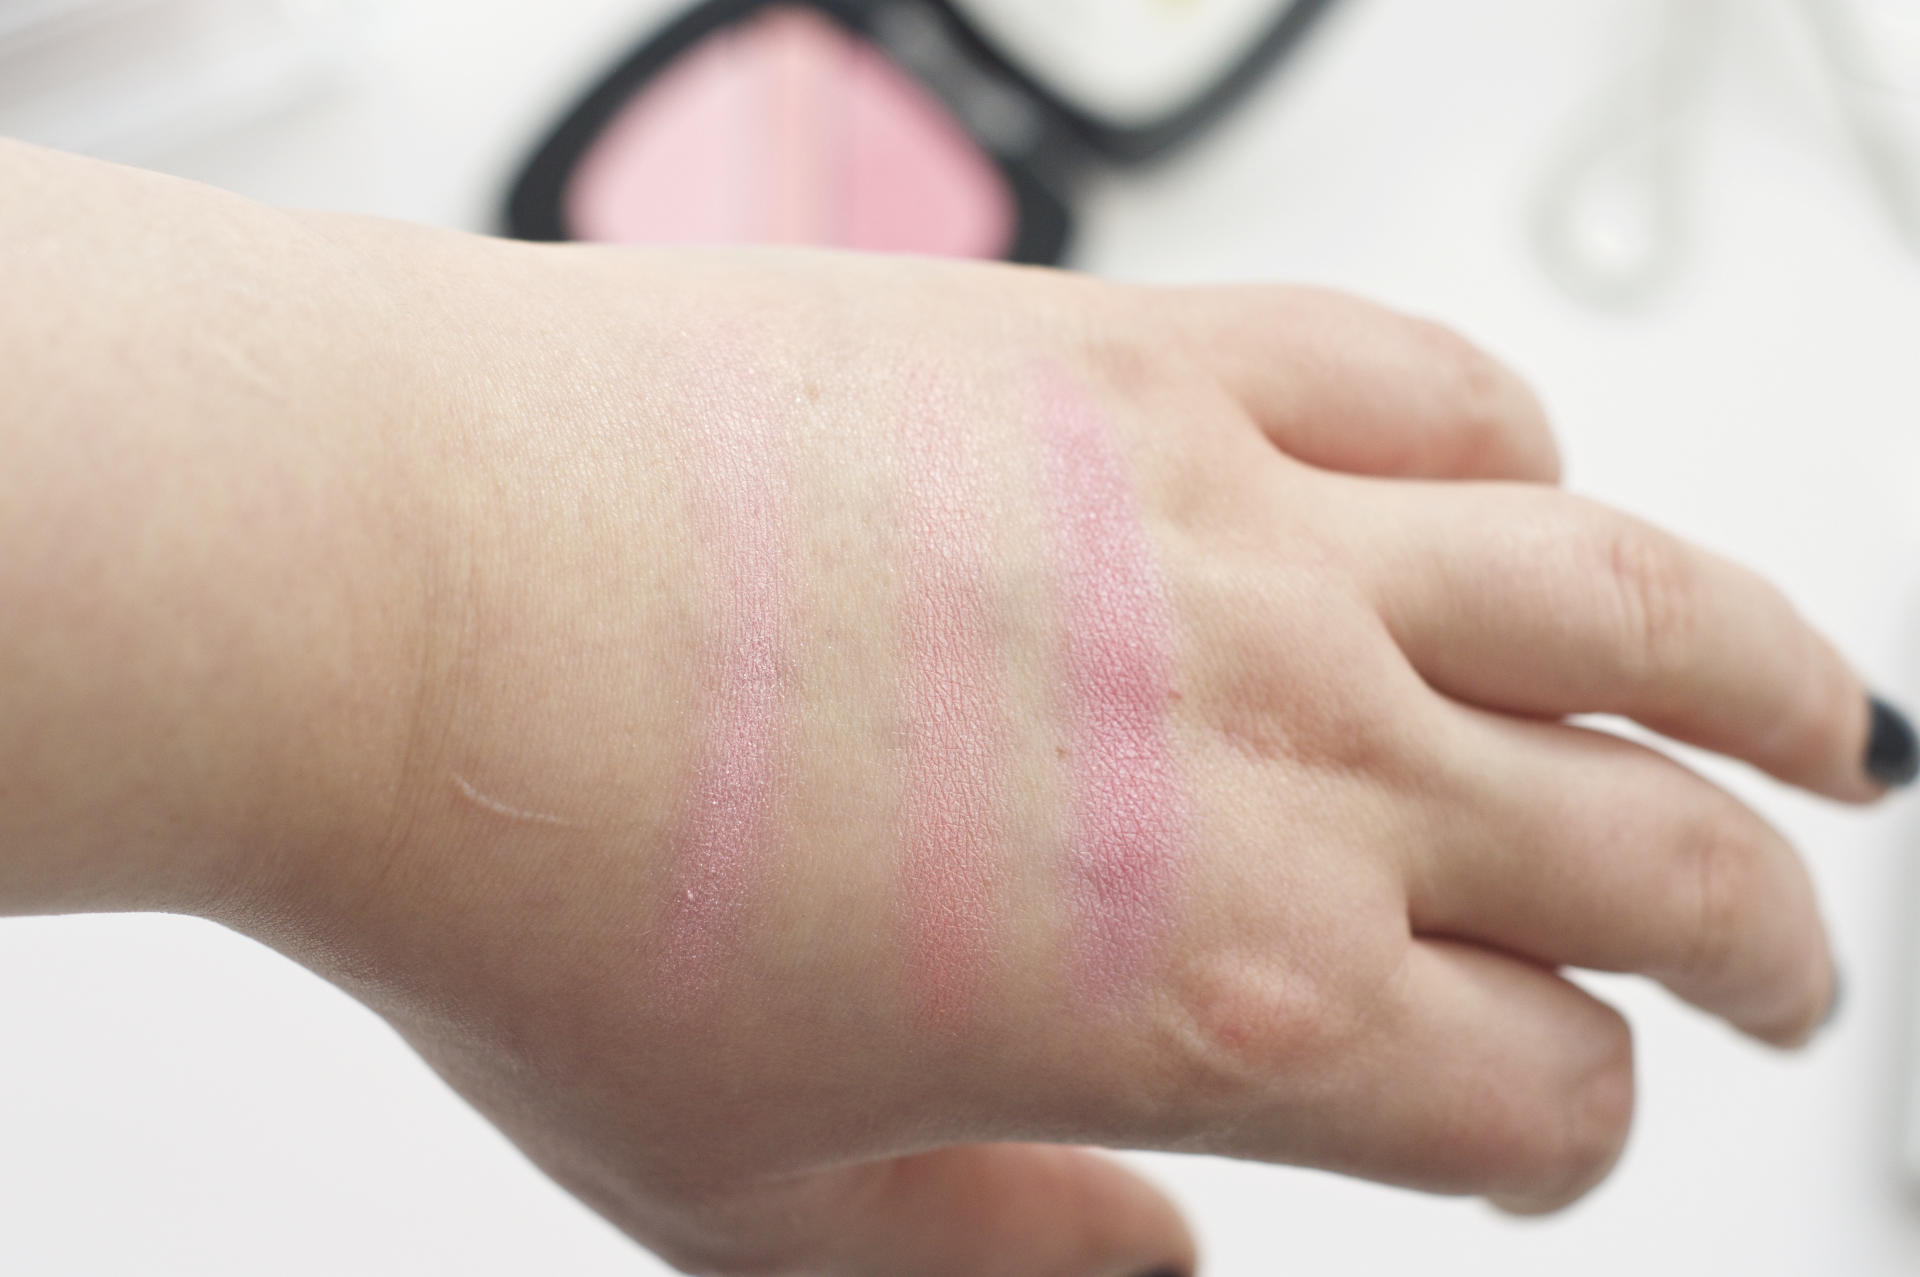 Made From Beauty L'Oreal Infallible Sculpt Blush in Soft Rosy Swatches